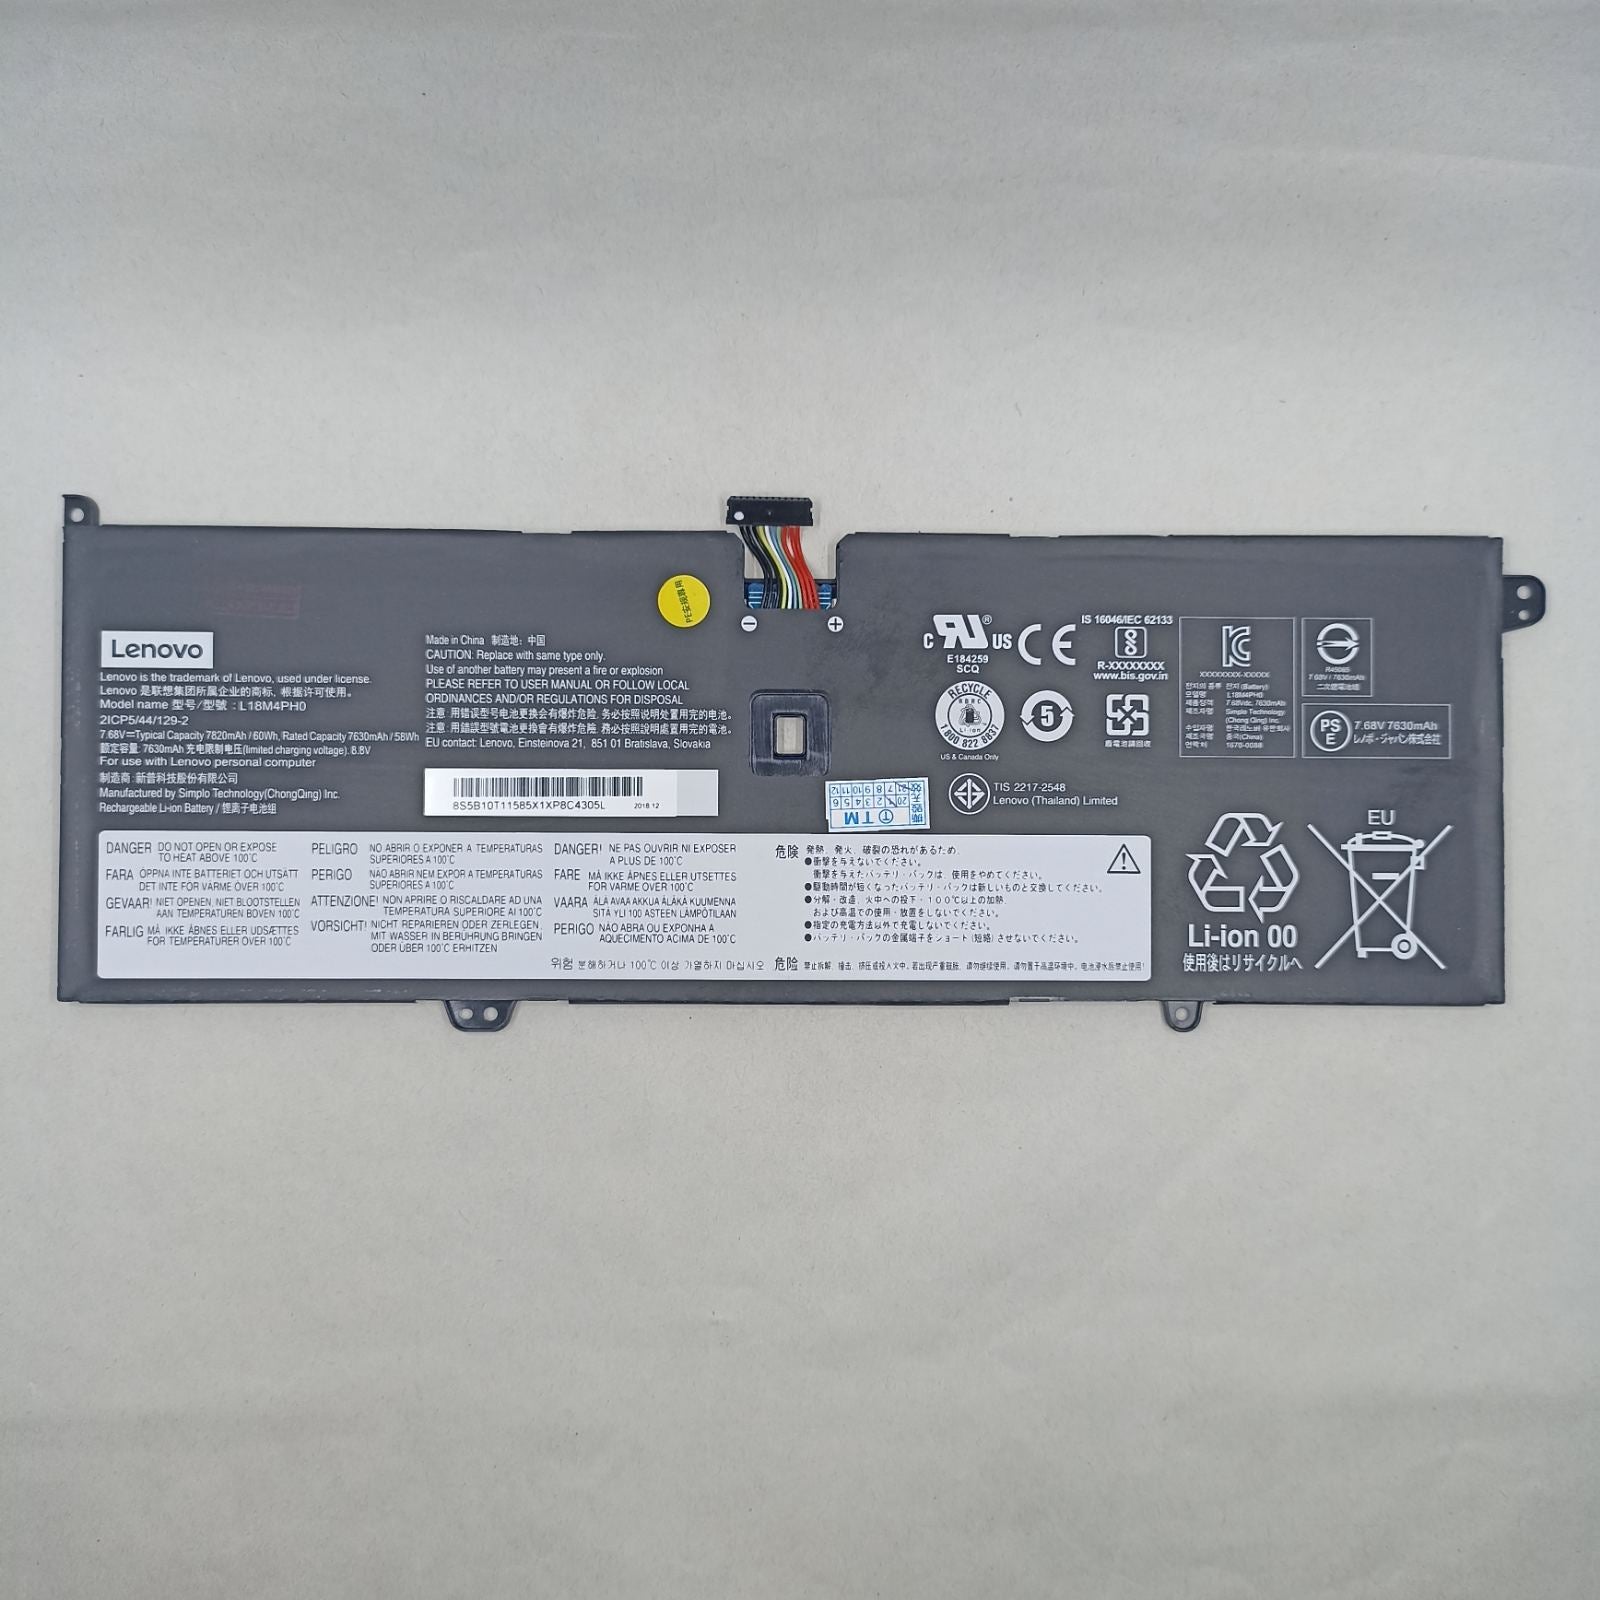 Replacement Battery for Lenovo Yoga C940-14IIL A1